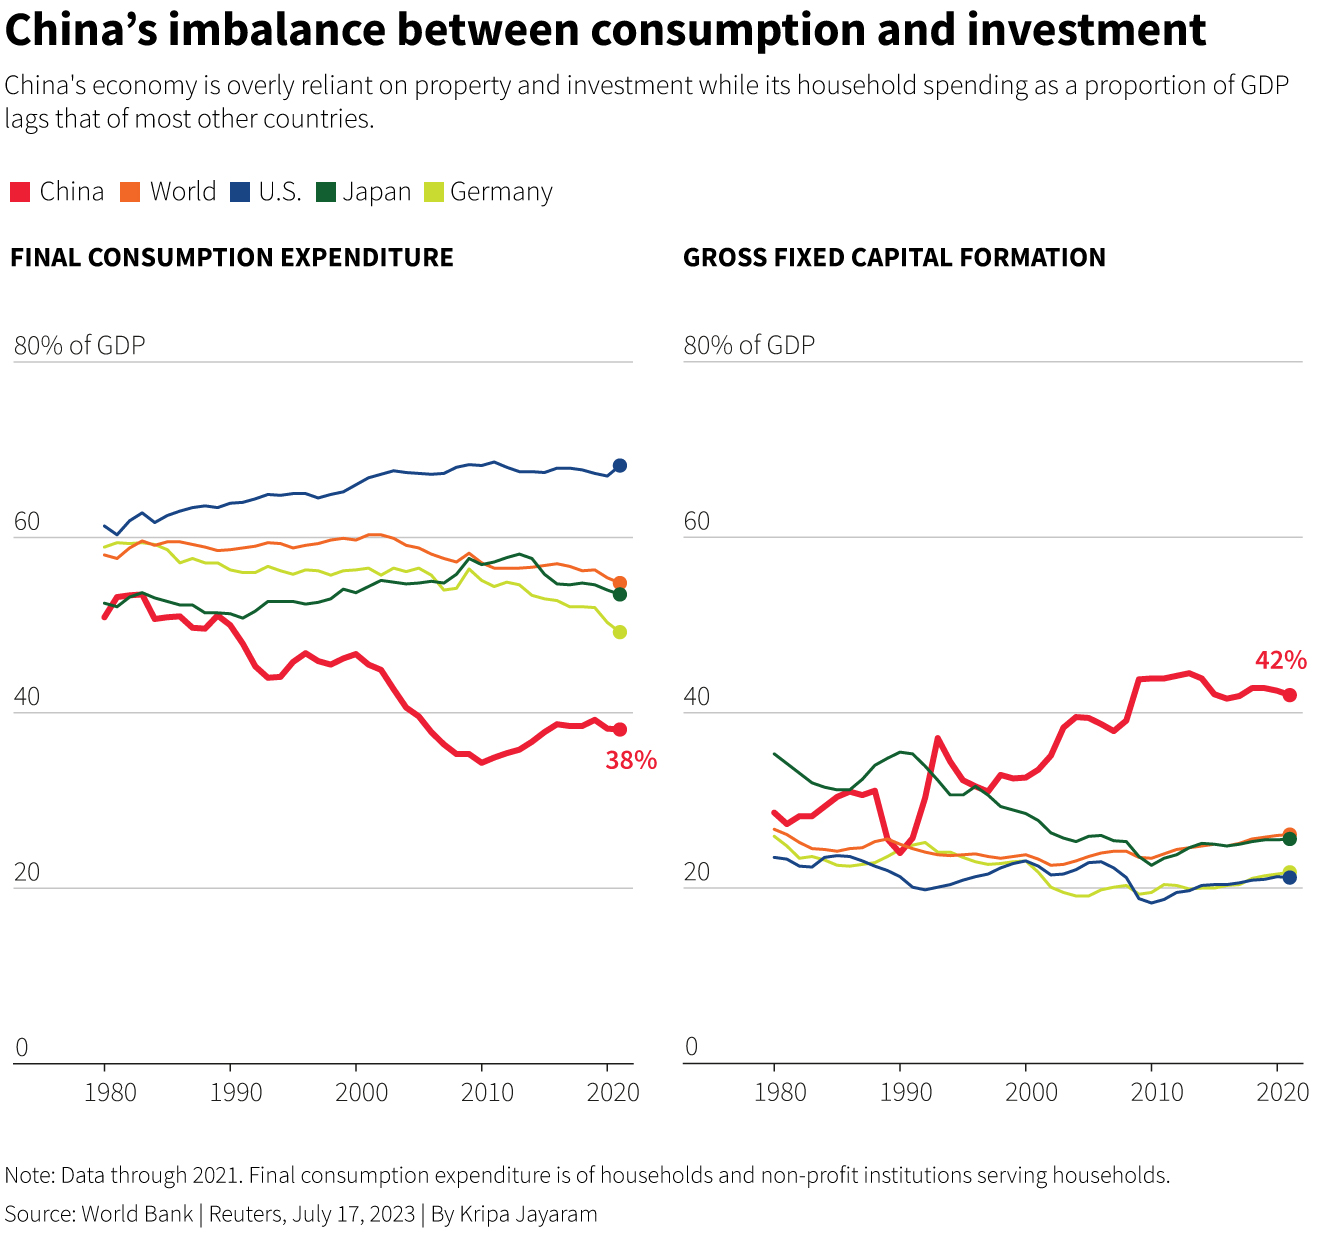 China's household spending as a proportion of GDP lags that of most other countries.